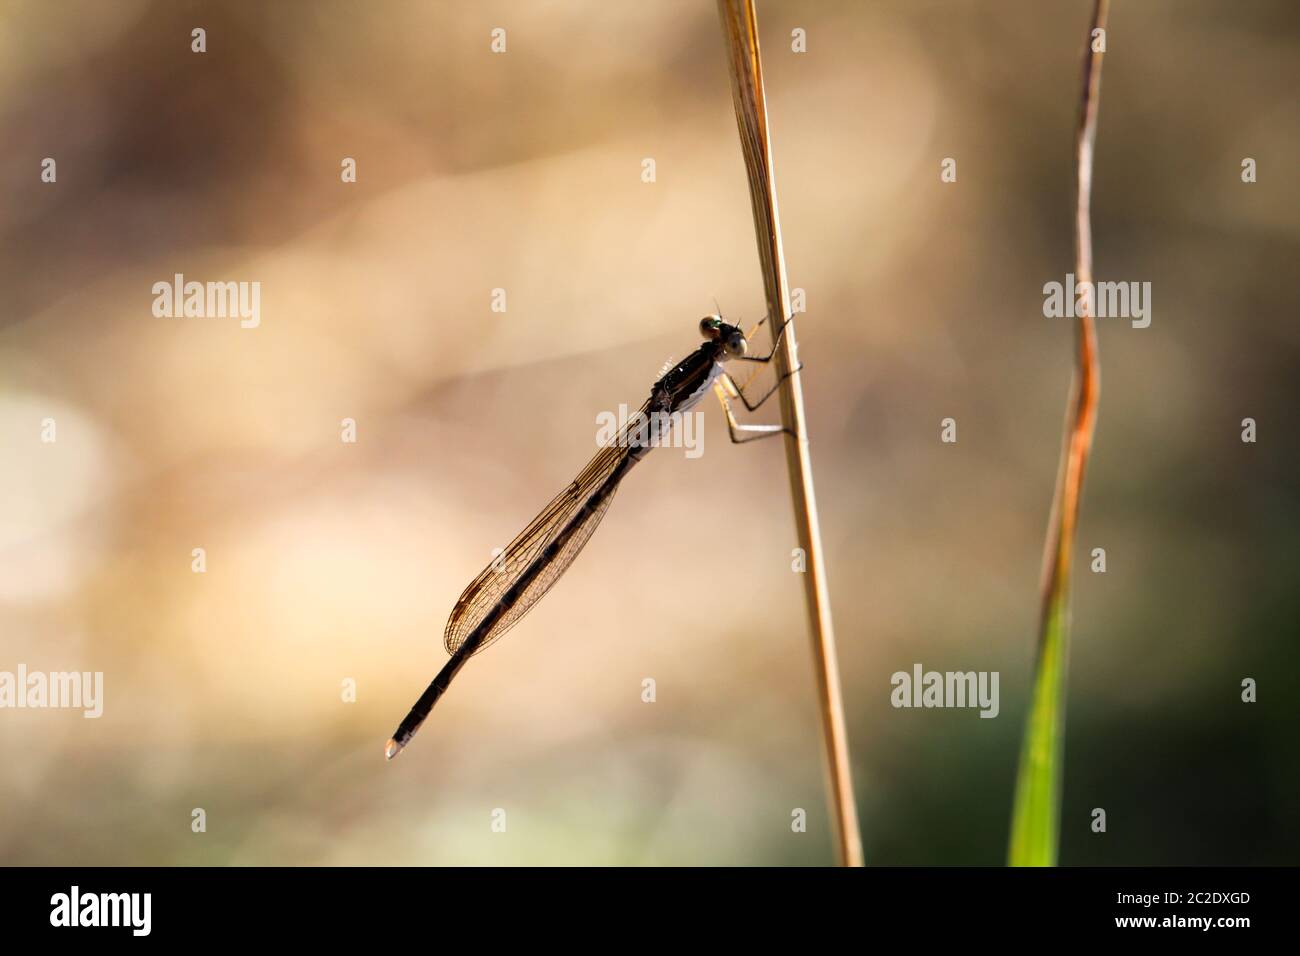 a dragonfly on a plant, portrait of a dragonfly Stock Photo